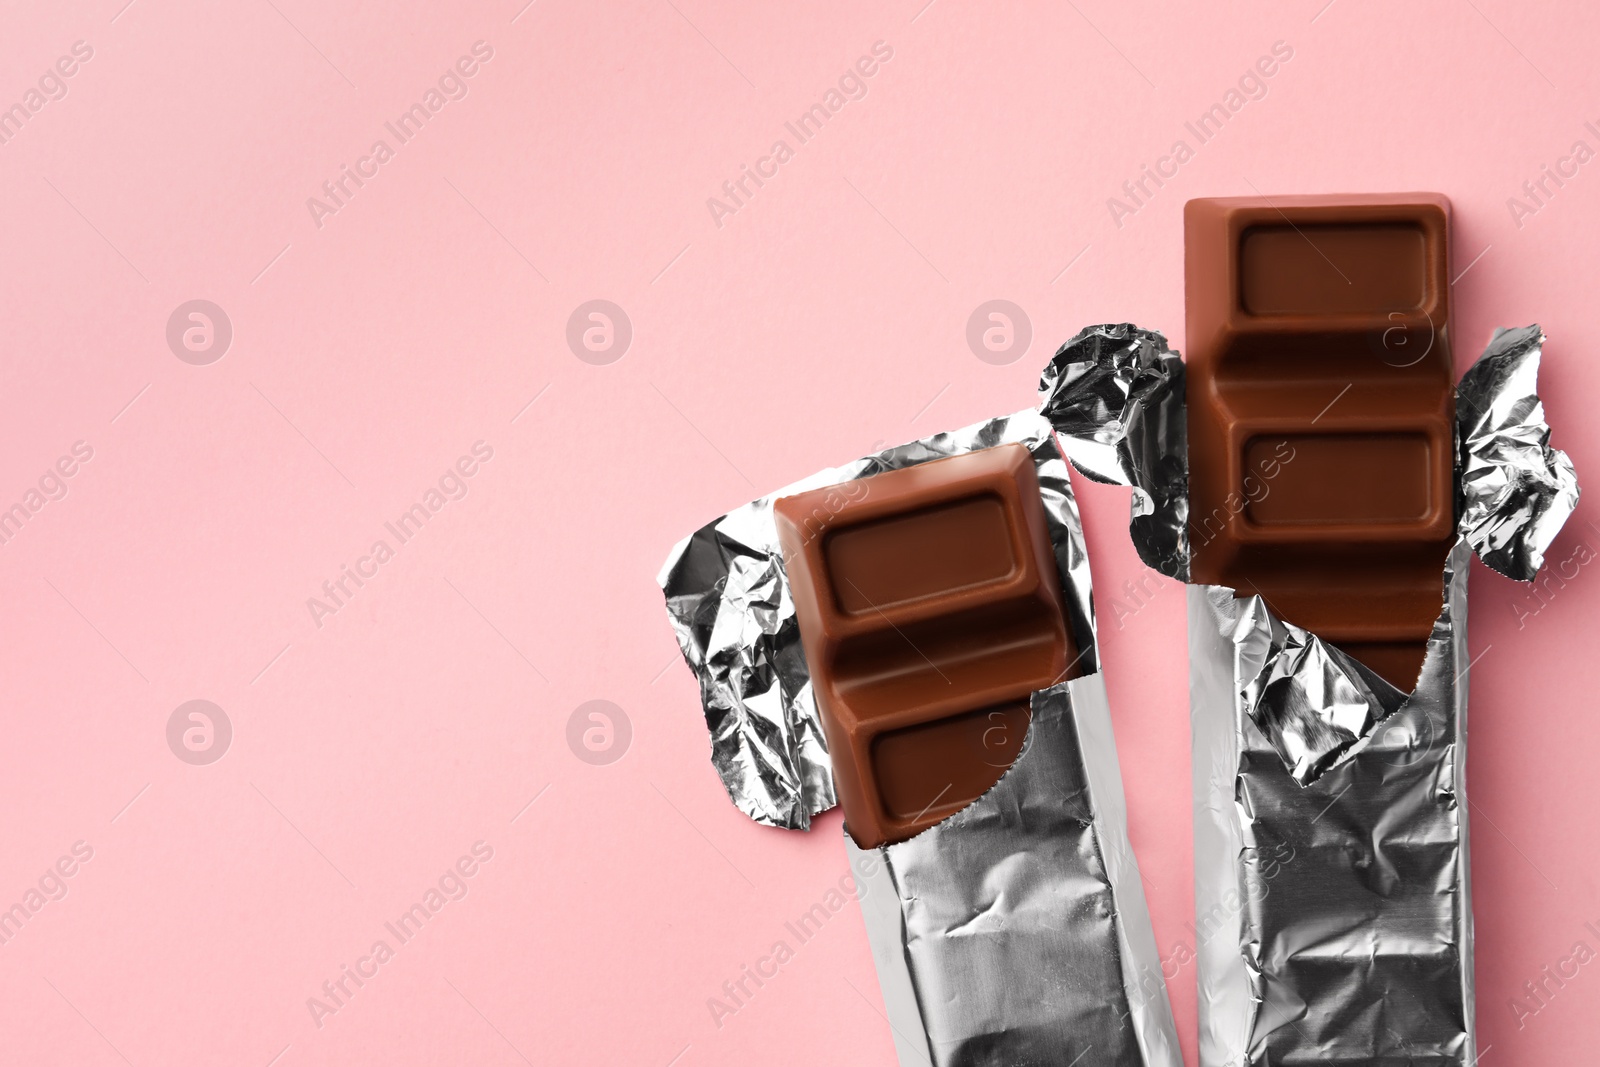 Photo of Delicious chocolate bars wrapped in foil on pink background, flat lay. Space for text